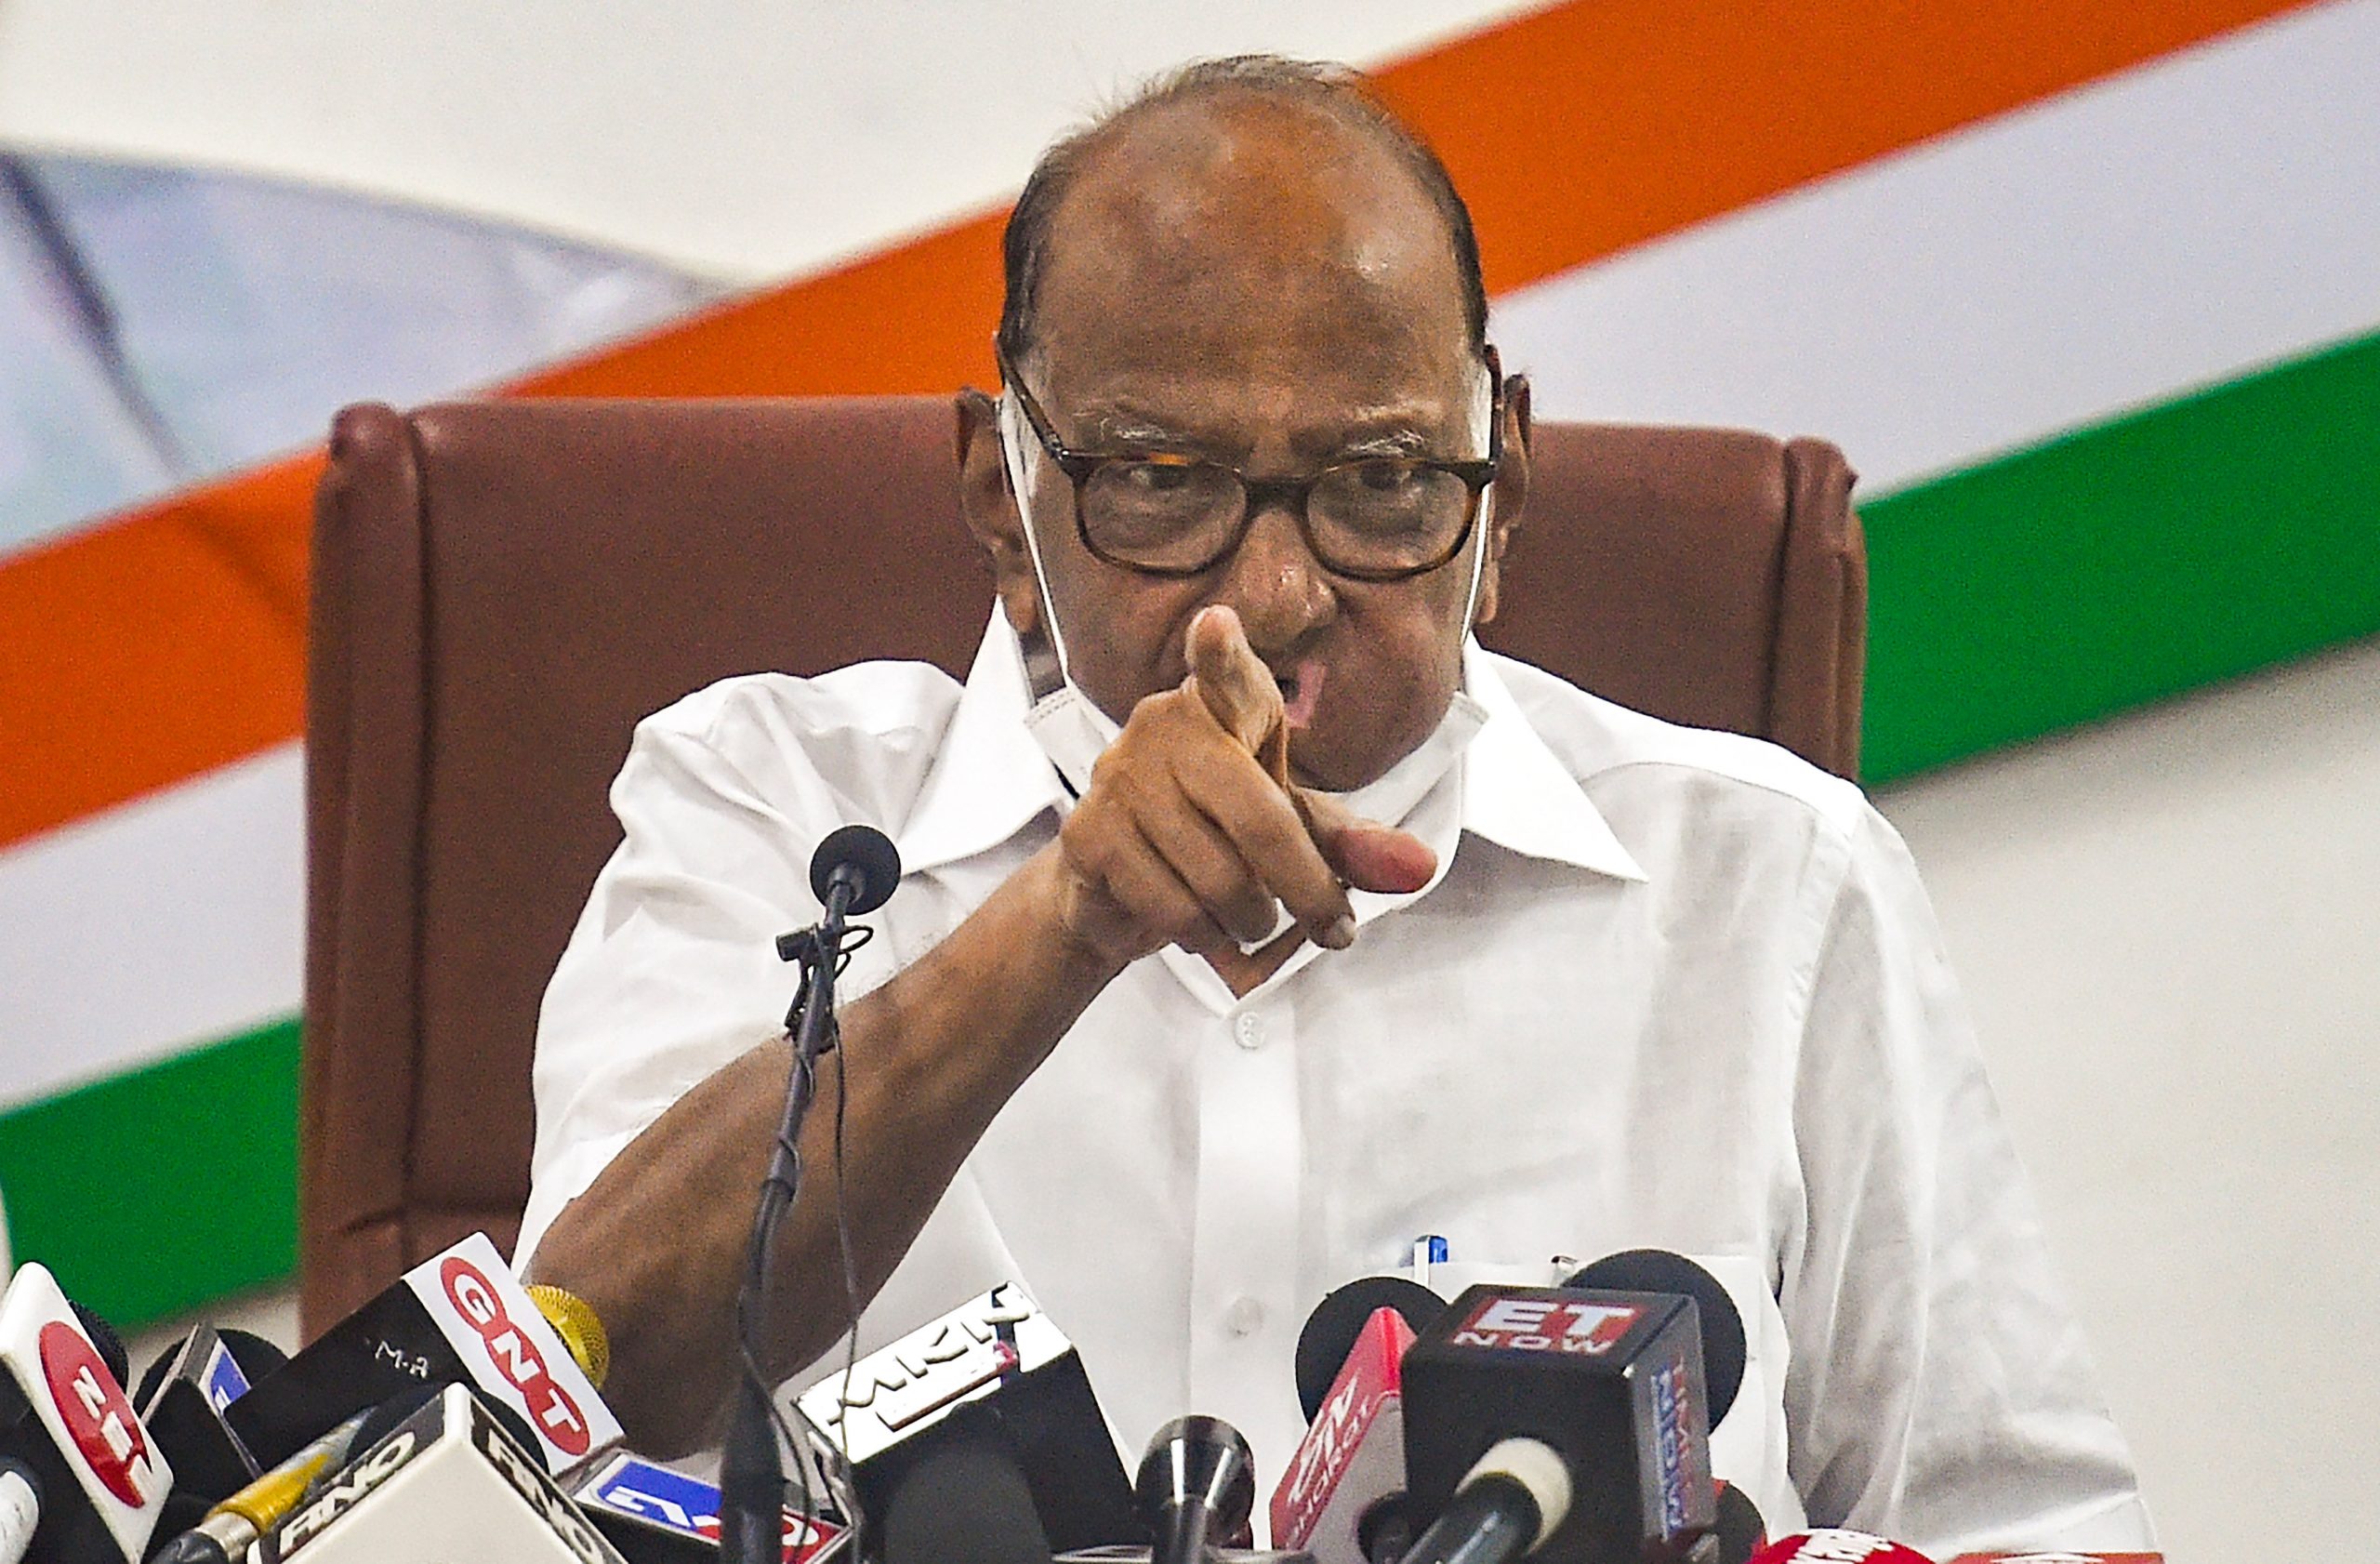 Speakers of truth ‘being harassed’, says Sharad Pawar after Nawab Malik’s arrest